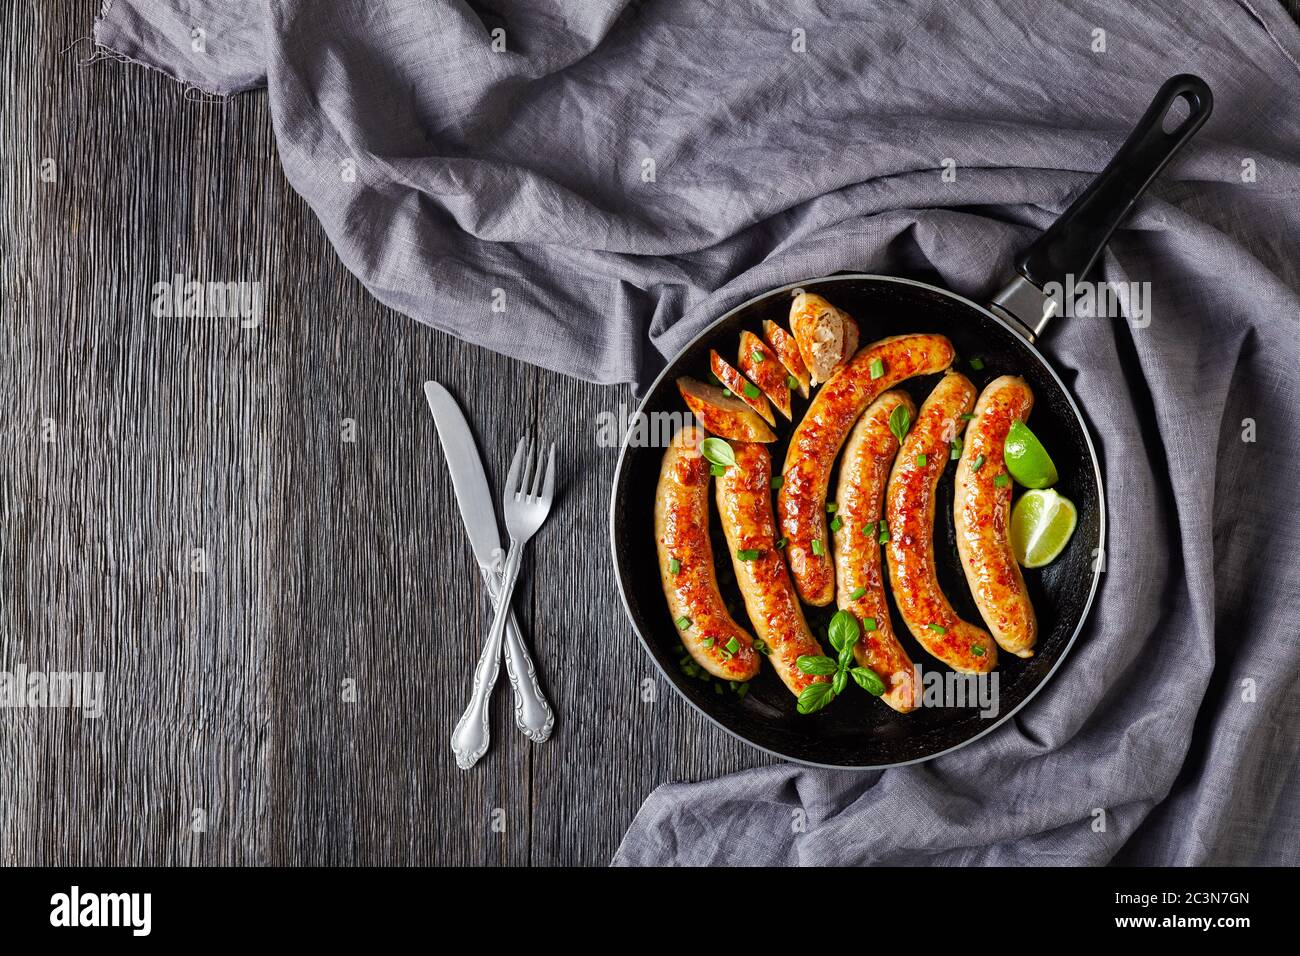 Original pork sausage links or patties fried on a skillet with fresh basil and spring onion served on a dark wooden background with cutlery, lime wedg Stock Photo